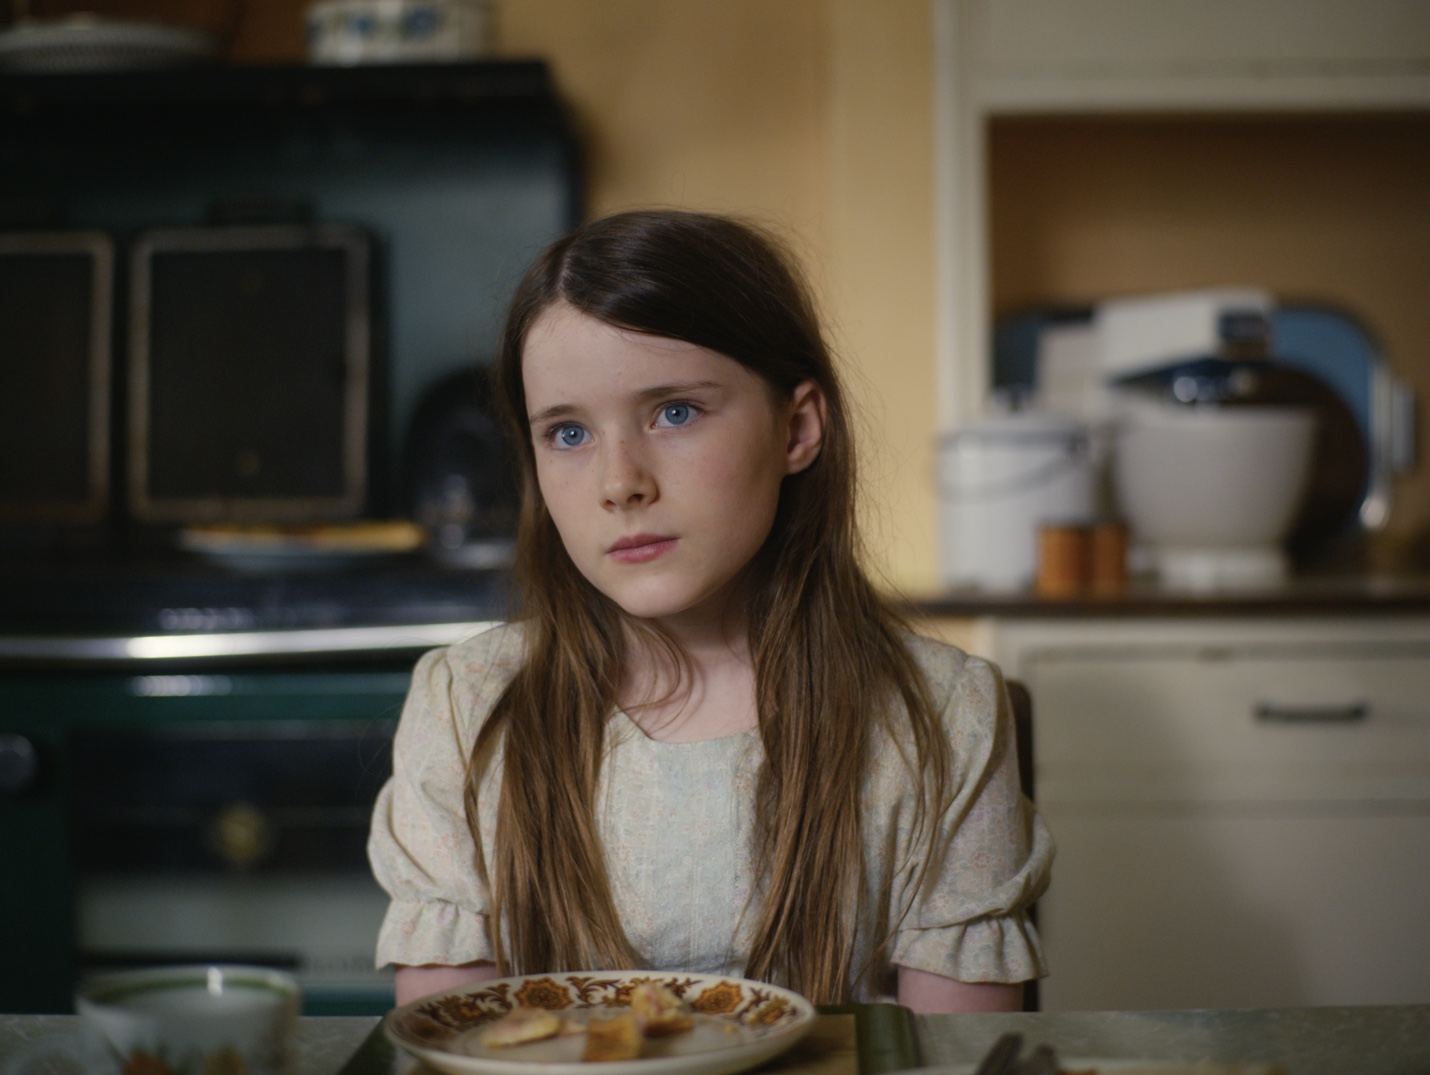 The Quiet Girl (An Cailín Ciúin) Film Screenings in the US Southeast